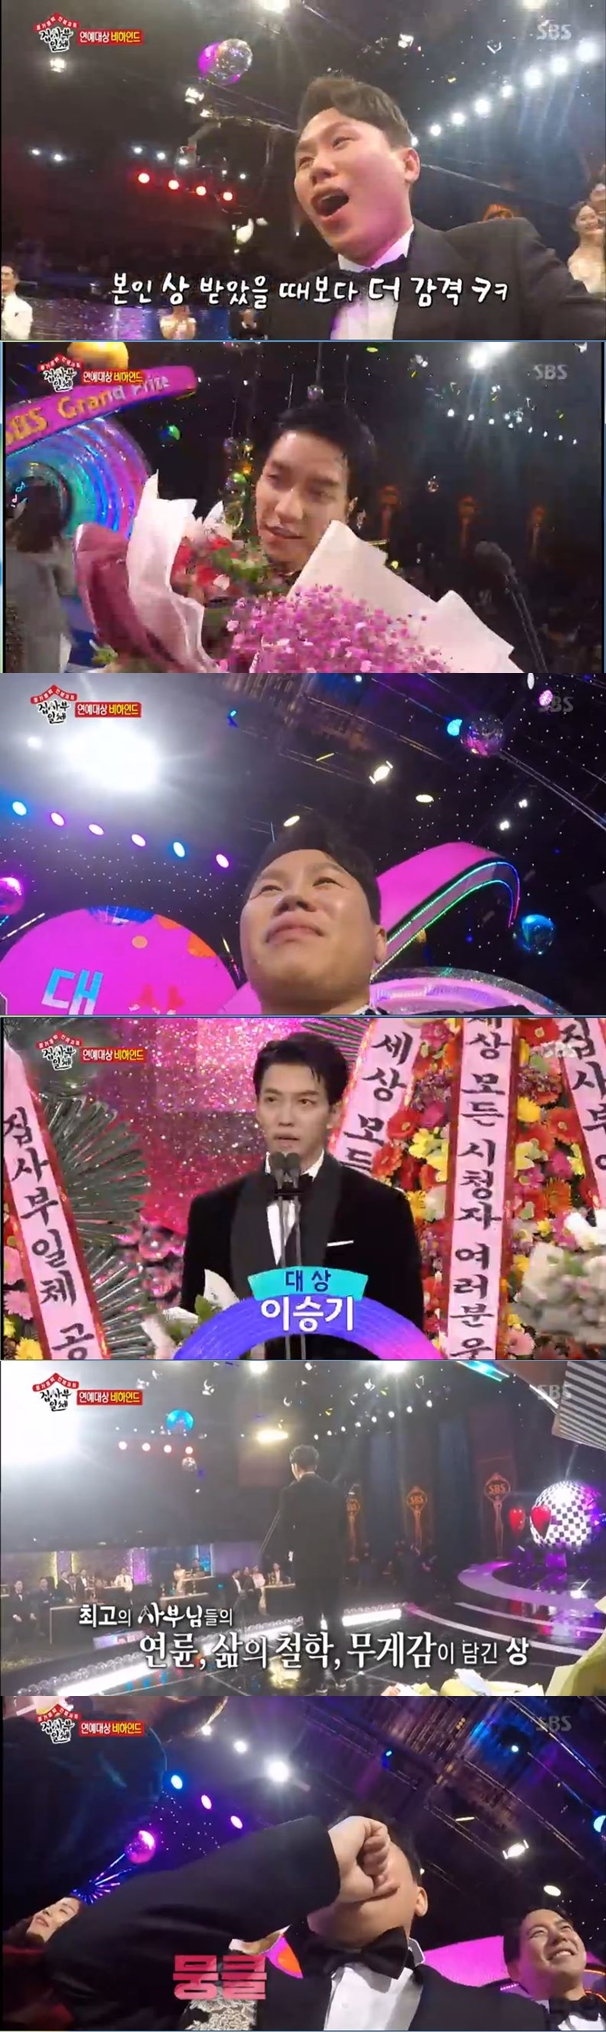 Yang Se-hyeong was moved by Lee Seung-gis award testimony.In the SBS entertainment program All The Butlers broadcasted on the afternoon of the 30th, Lee Seung-gi came out with the behind-the-scenes video of the members on the day of receiving the SBS entertainment Grand Prize.Lee Seung-gi was thrilled and tearful as she failed to anticipate when her name was called in the target announcement.Yang Se-hyeong was more delighted than he was awarded when Lee Seung-gis name was called.Lee Seung-gi mentioned the names of the members one by one as a testimonial.Lee Sang-yoon said that he had endured the adolescence of the arts, and that he had lost his role model to the upbringing, but he got a good brother.Finally, Yang Se-hyeong thanked him, Without this person, All The Butlers could not have lasted.Yang Se-hyeong cried, I think I received Confessions.Lee Seung-gi was awarded the prize, but the members showed good teamwork sincerely celebrating his awards.